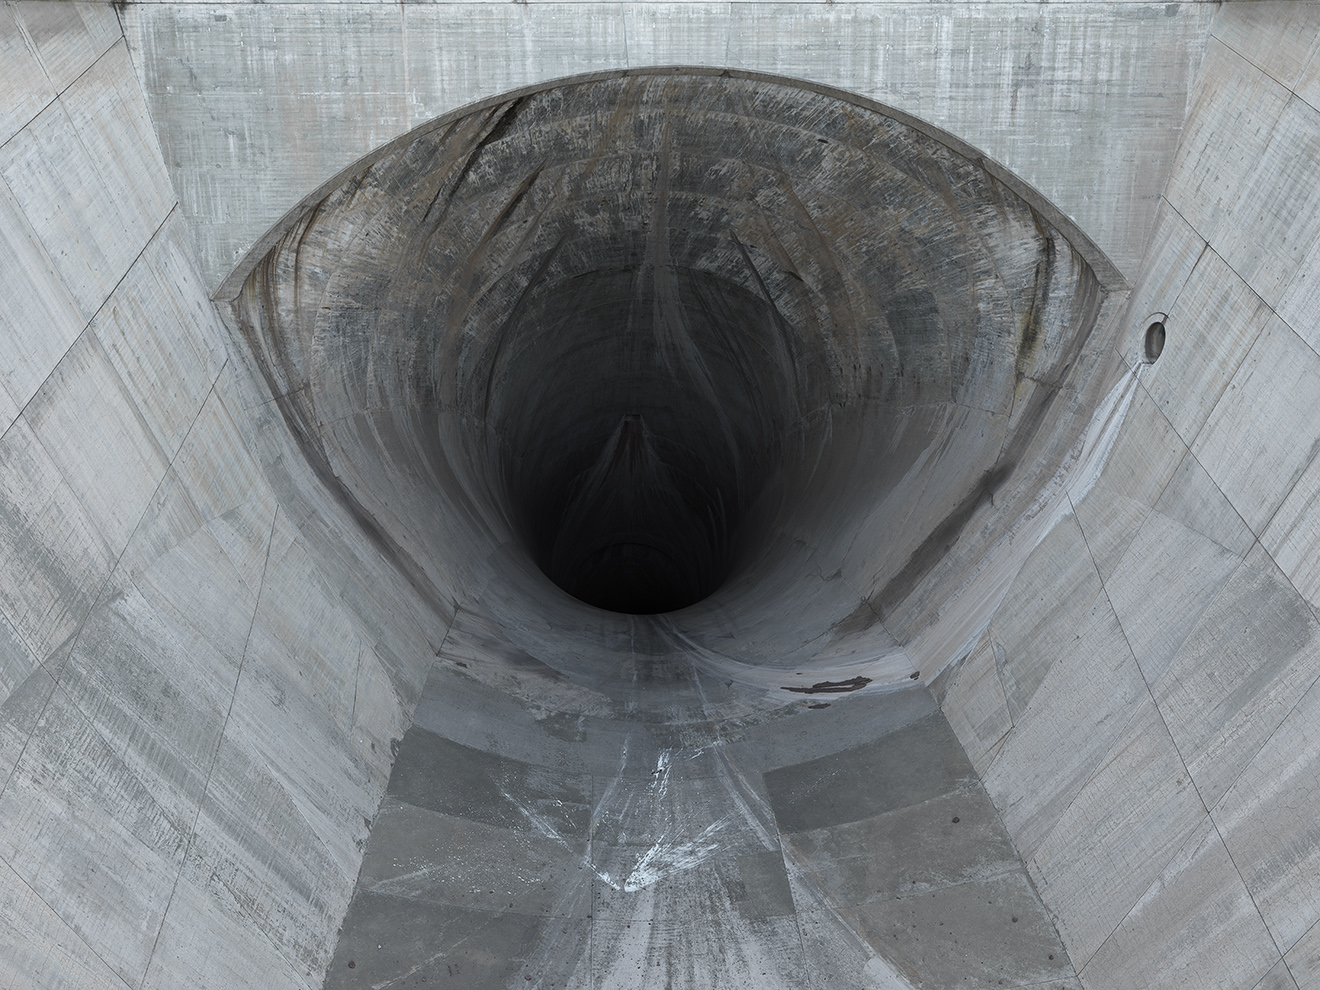 Hoover dam's spillways are connected to tunnels 15m in diameter, drilled through the rocks, that can handle 200,000 cubic feet...